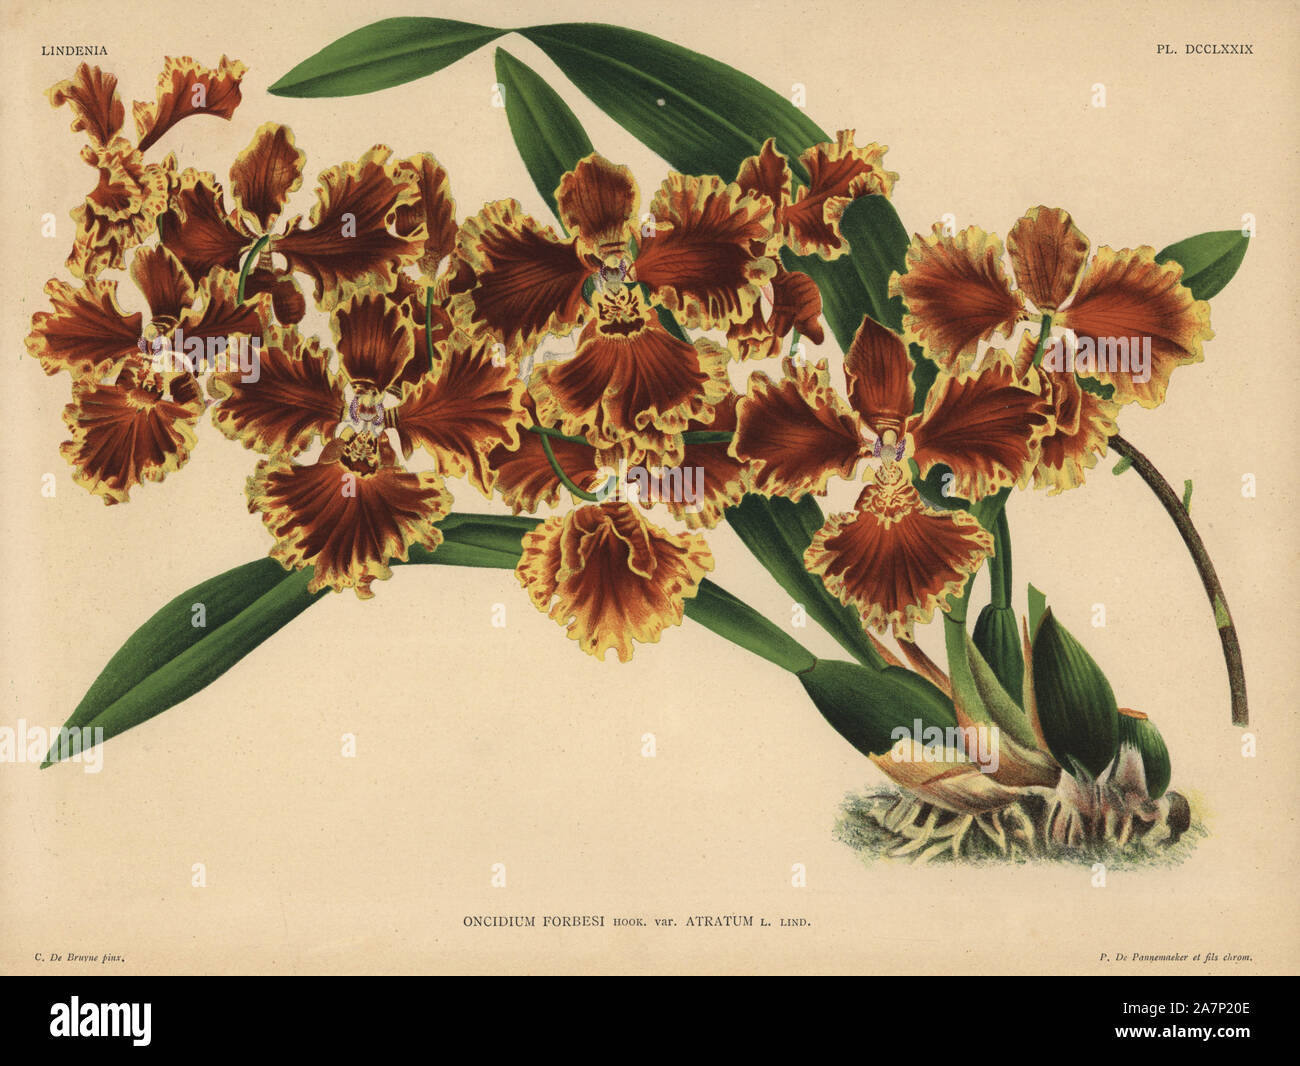 Reverend Forbes' Oncidium, Gomesa forbesii, Oncidium forbesii. Illustration drawn by C. de Bruyne and chromolithographed by P. de Pannemaeker et fils from Lucien Linden's 'Lindenia, Iconographie des Orchidees,' Brussels, 1902. Stock Photo